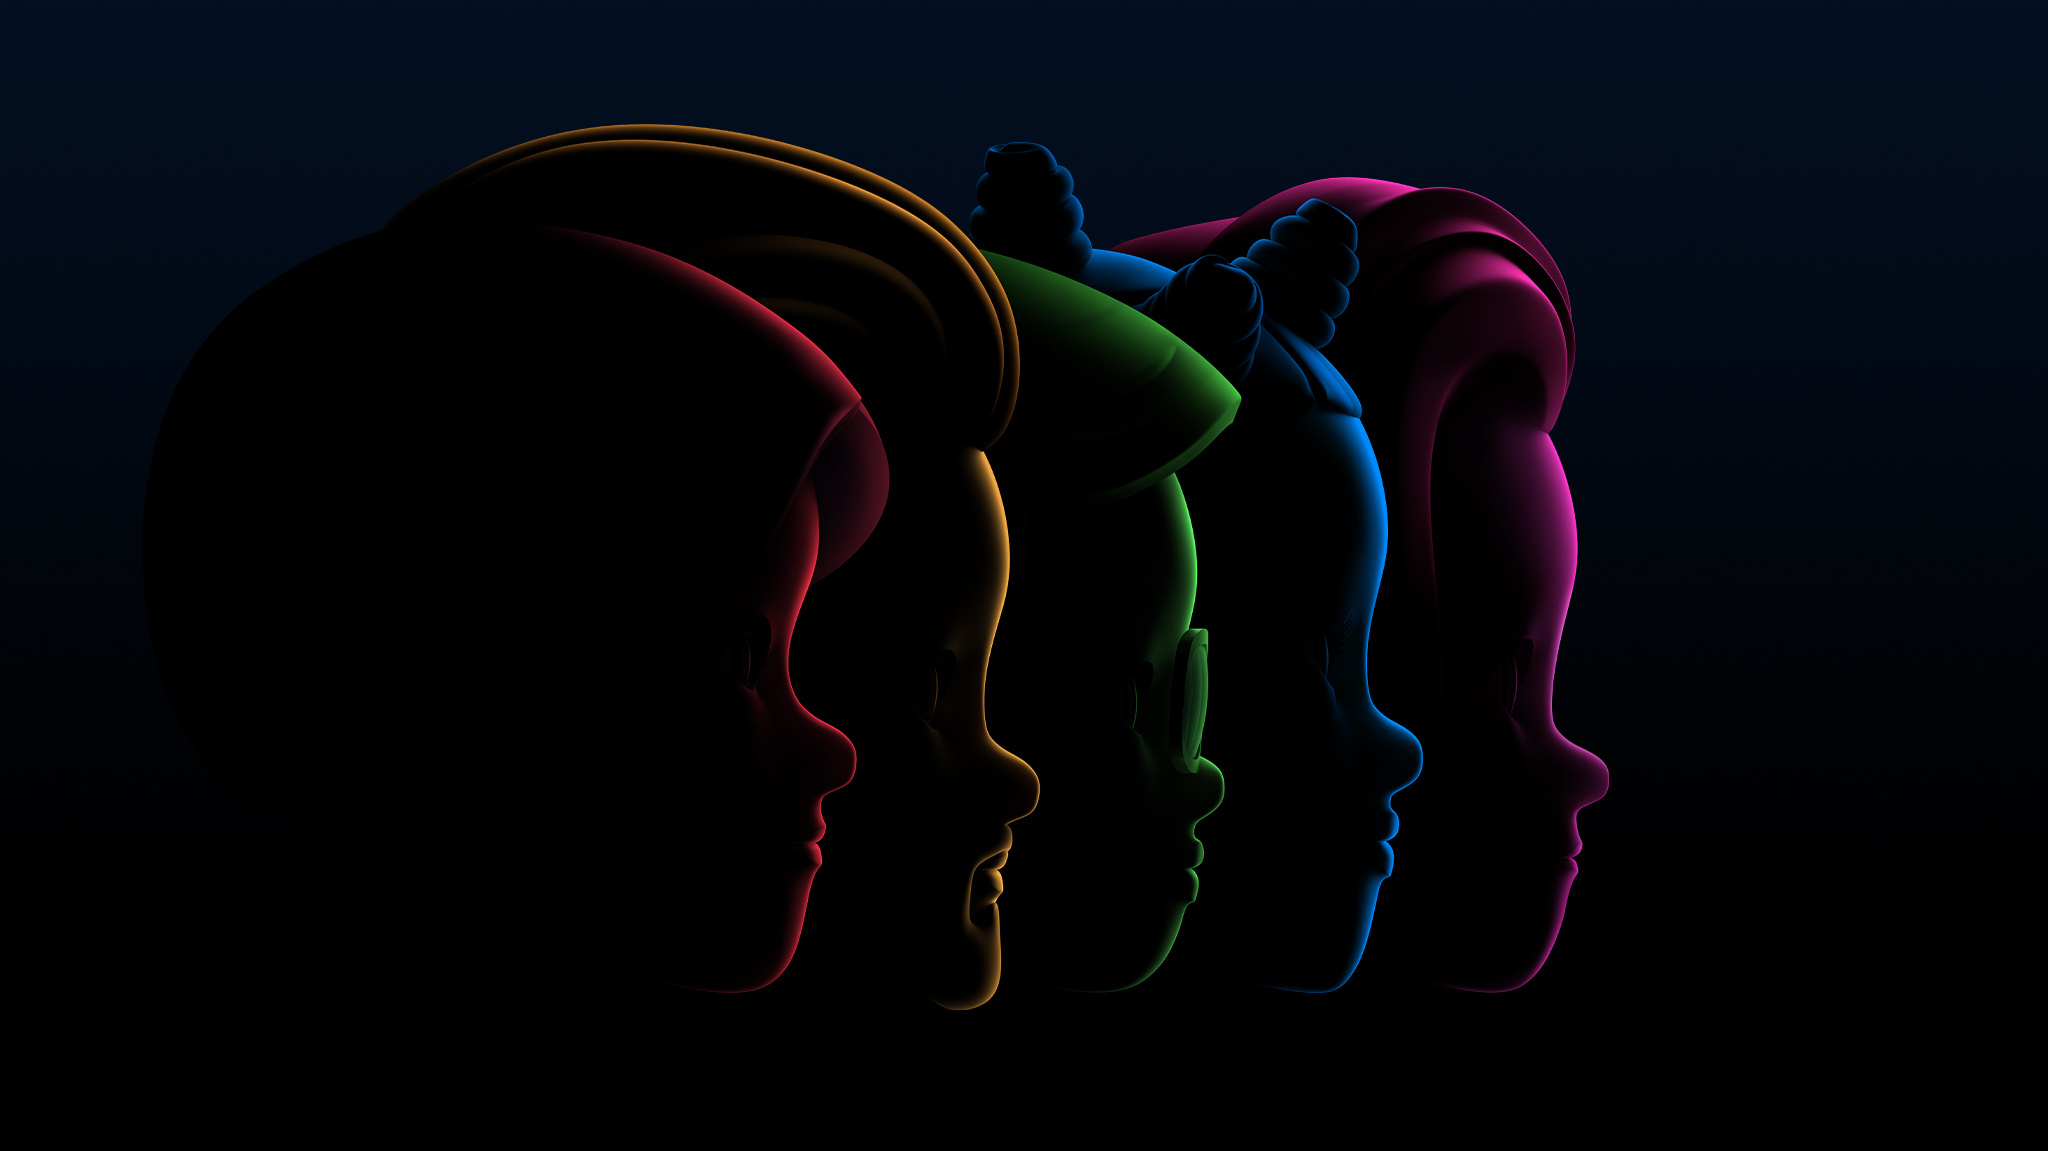 An image revealing the silhouettes of five faces in a row, each in a different color: red, yellow, green, blue, and purple.